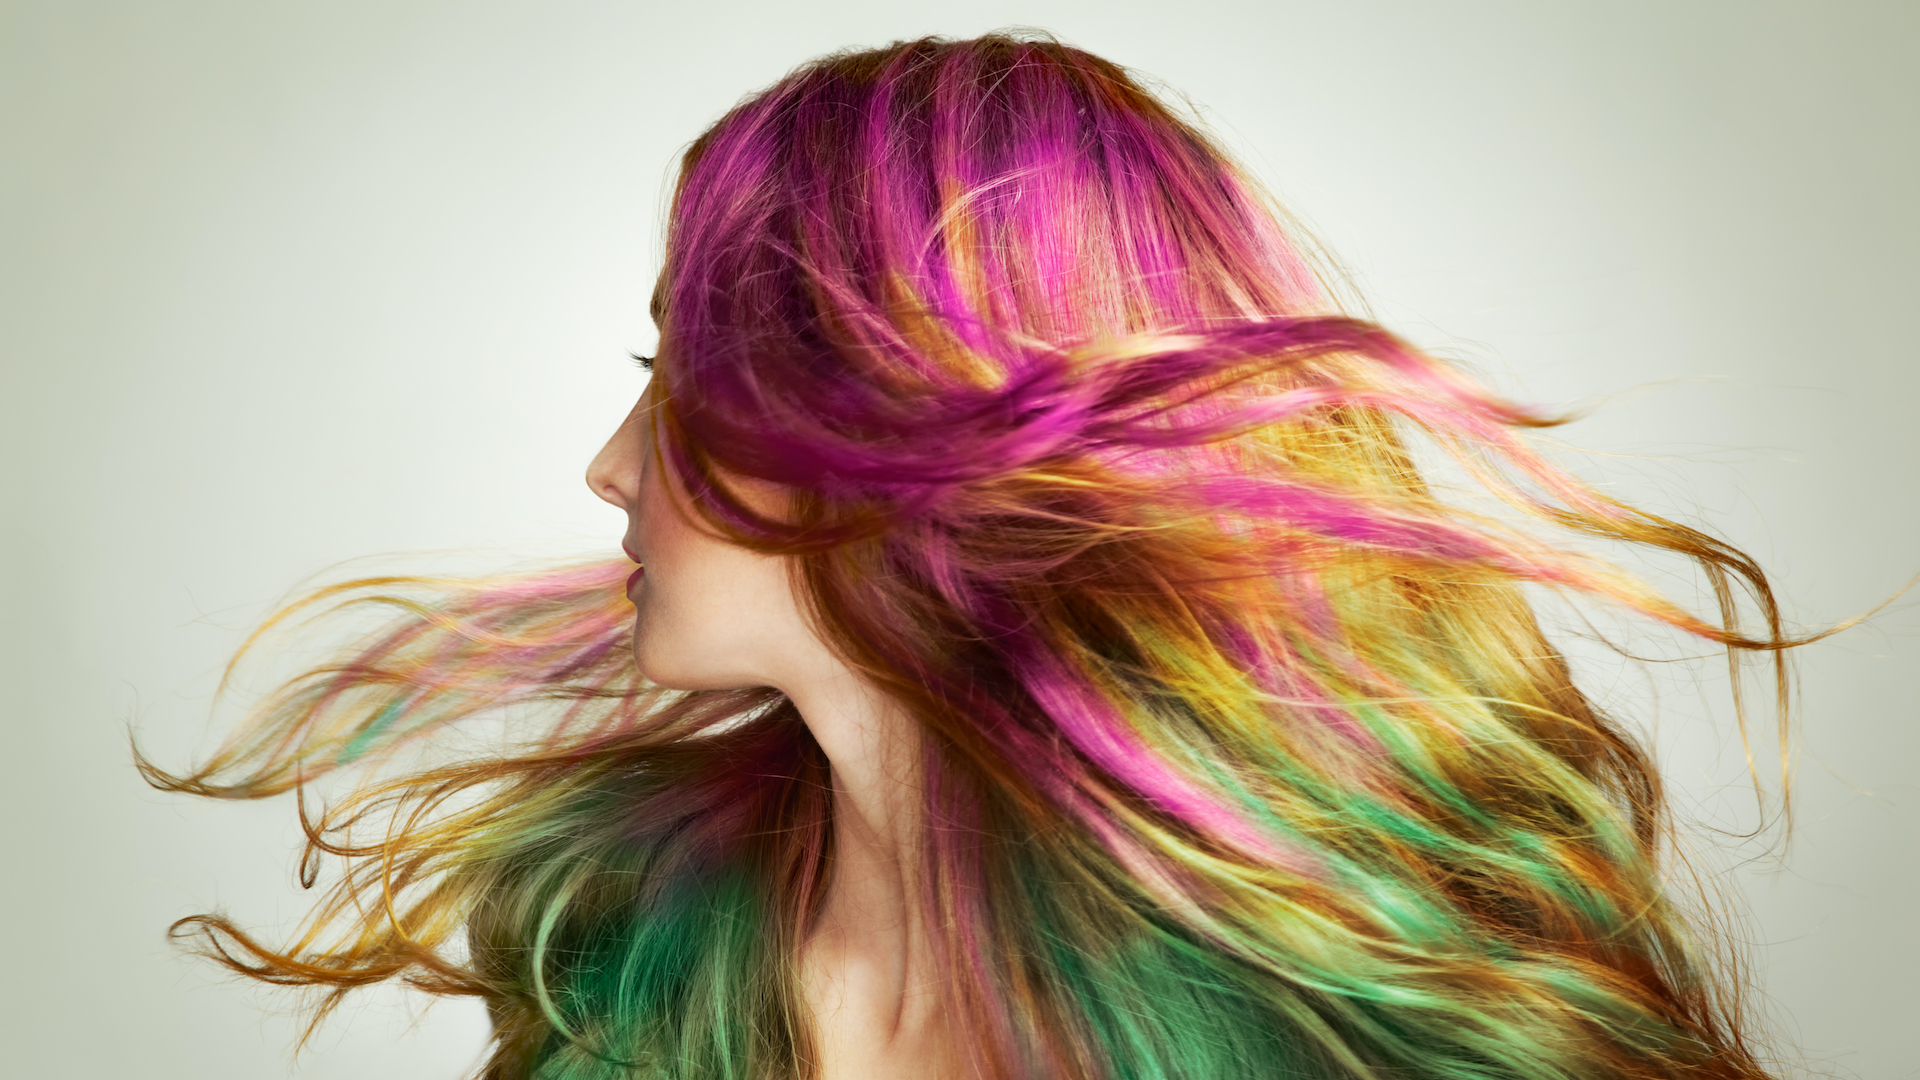 A model shows off her multi-coloured hair